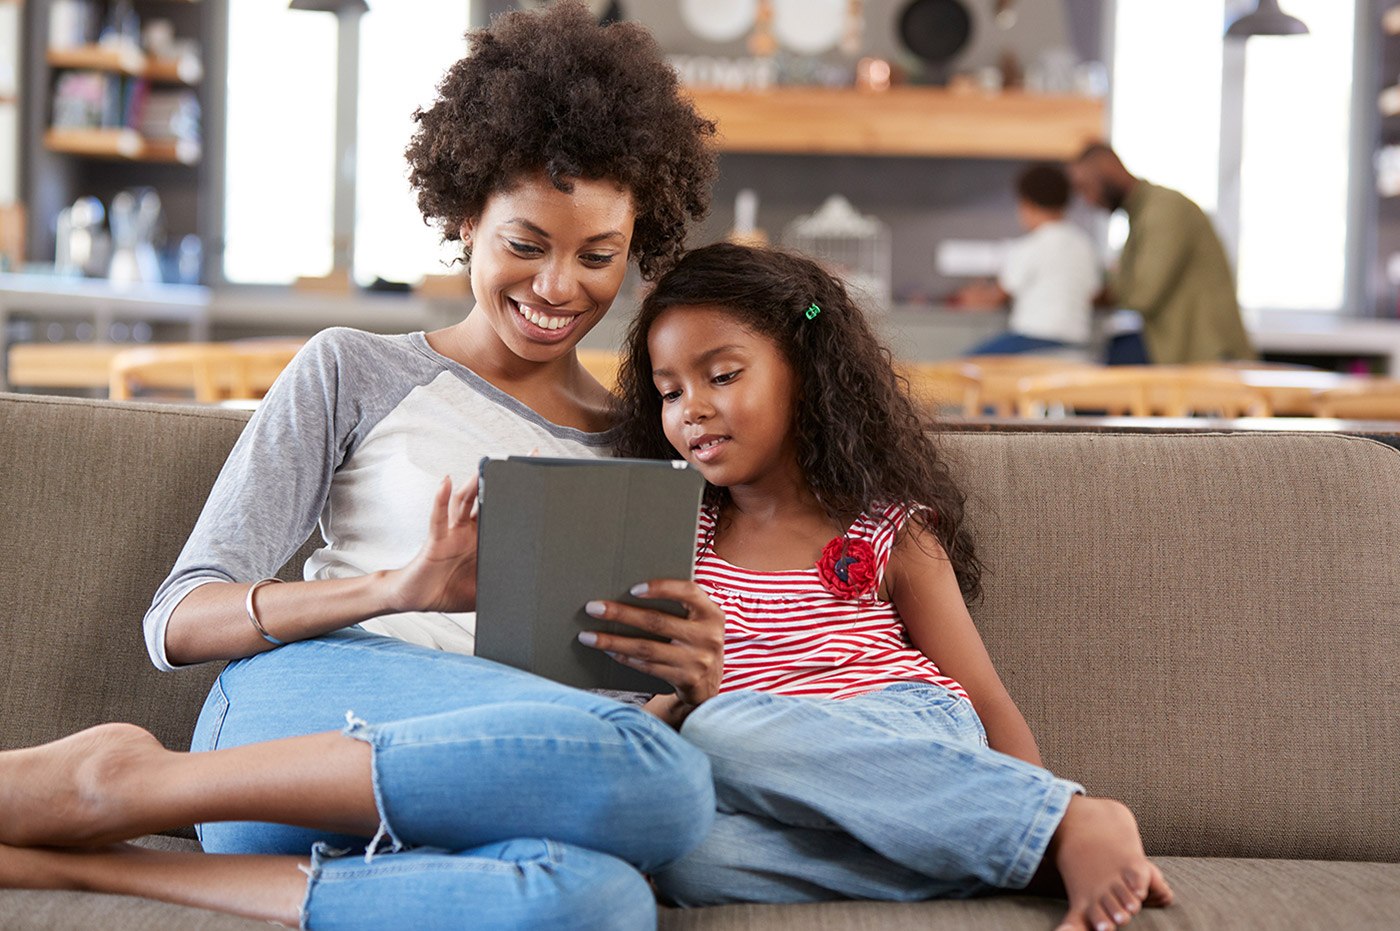 African-American mother and daughter looking at an iPad together.